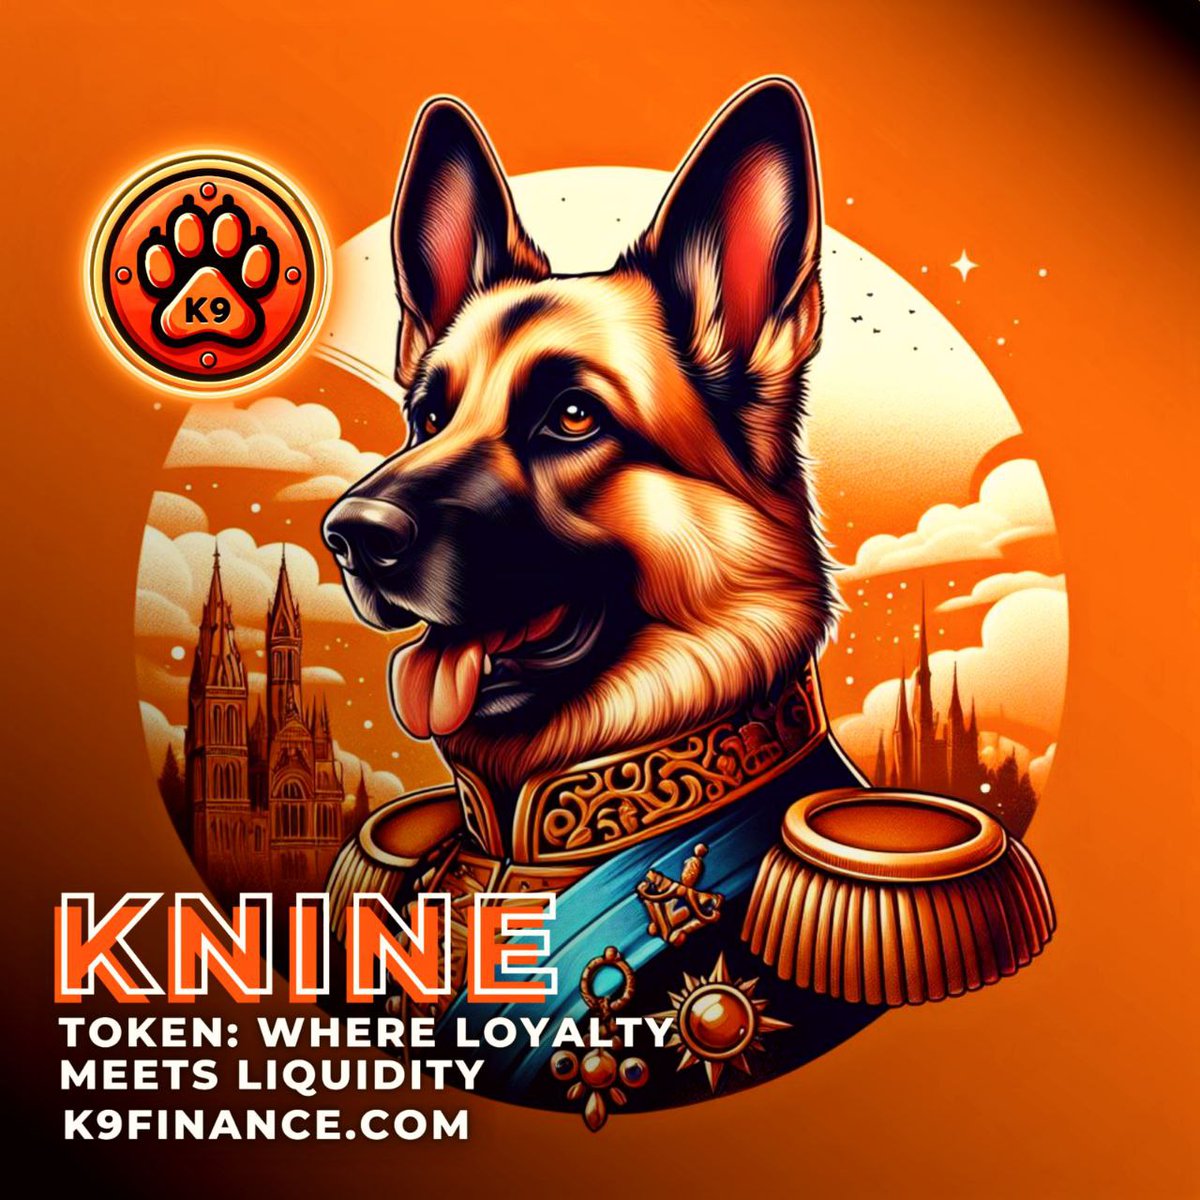 Elevate your impact and involvement within the K9Finance ecosystem by participating in the exclusive K9 DAO Whale Program.

$KNINE #KNINE
#K9 #K9unit 

X: x.com/K9finance⏳

💎 linktr.ee/k9finance

#ERC20 #shibarium  #CryptoNewsD2
#Crypto_Marketing_Titans⌛